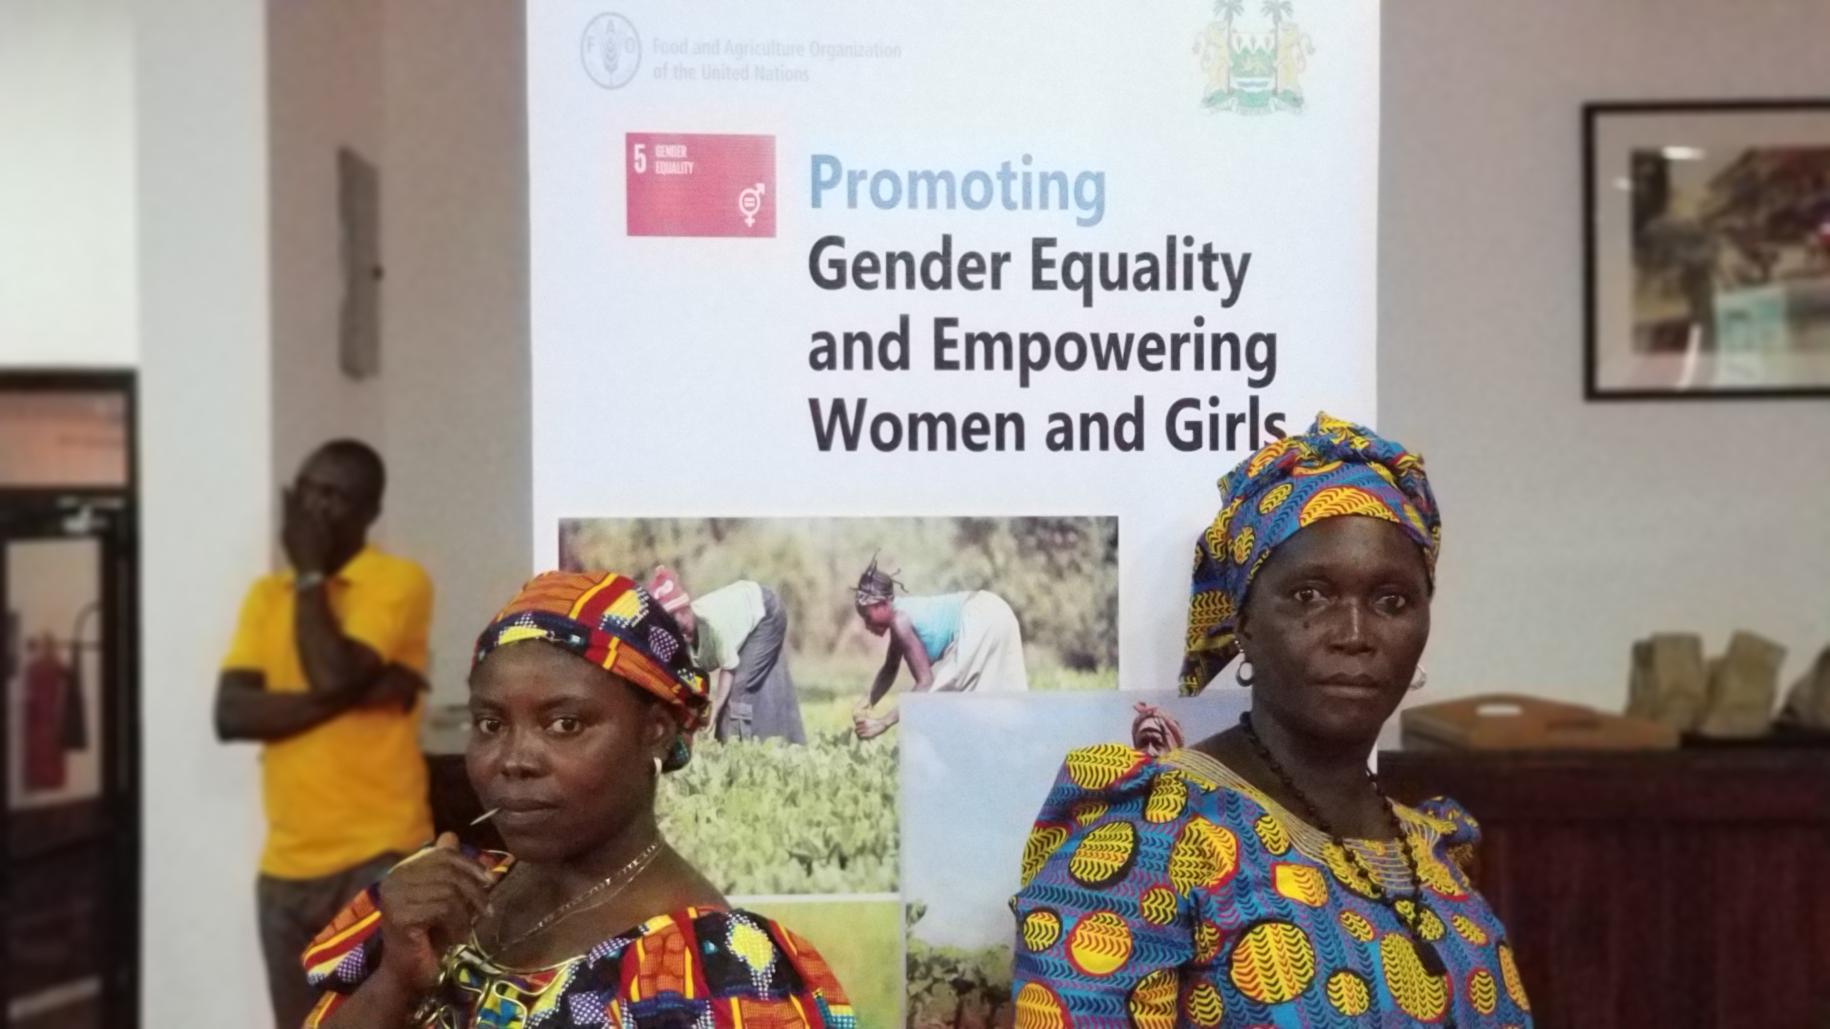 Two women stand powerfully in front of an banner promoting SDG 5: Gender equality and empowering women and girls.